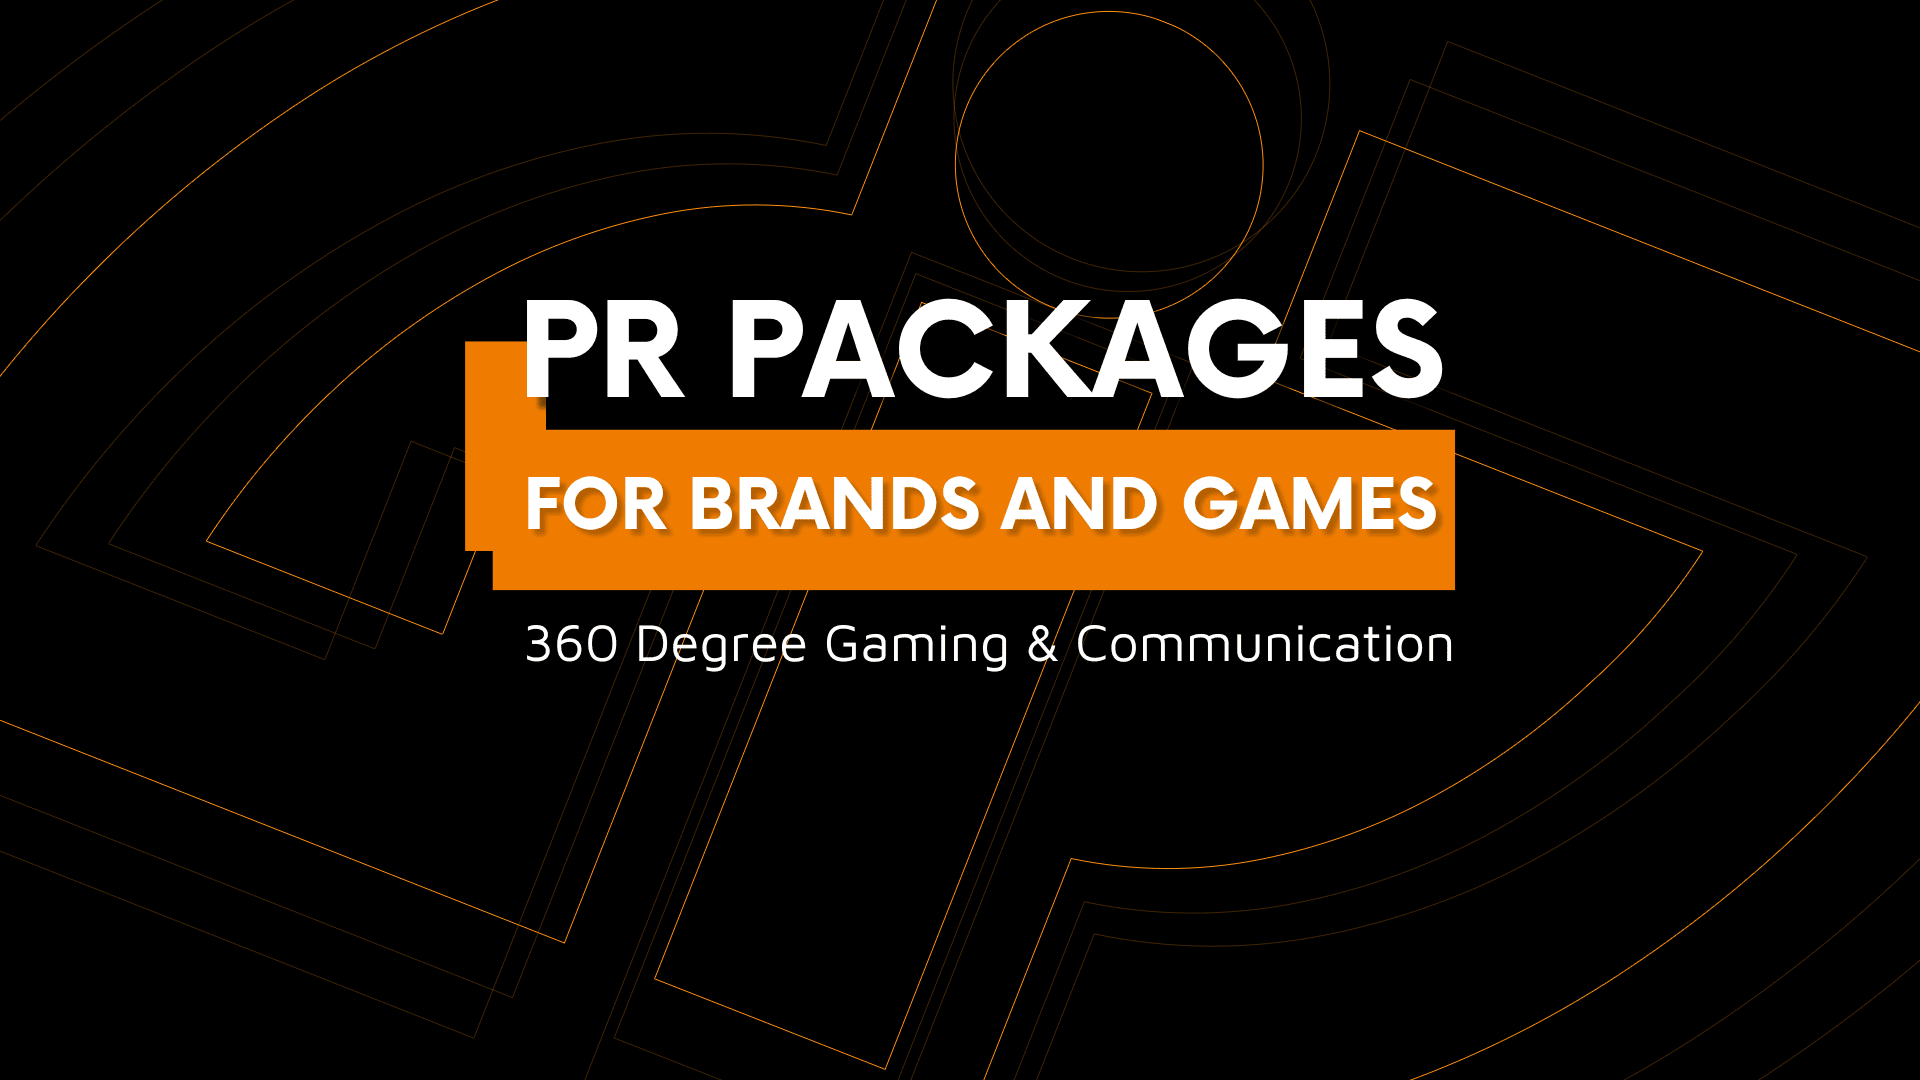 Gaming and Esports For Brands - PR Packages